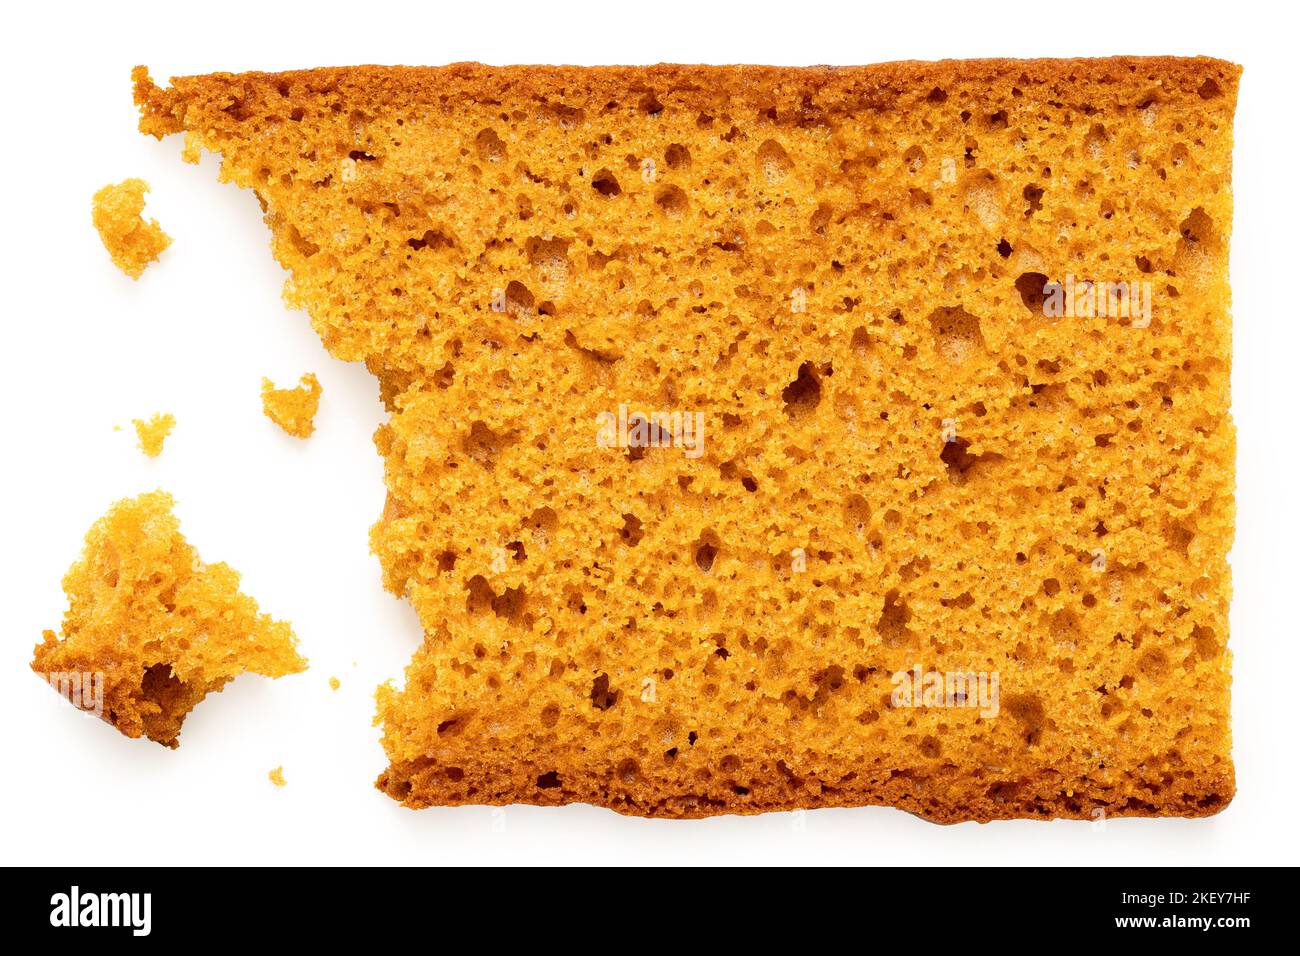 Partially eaten slice of spiced honey cake with crumbs isolated on white. Top view. Stock Photo